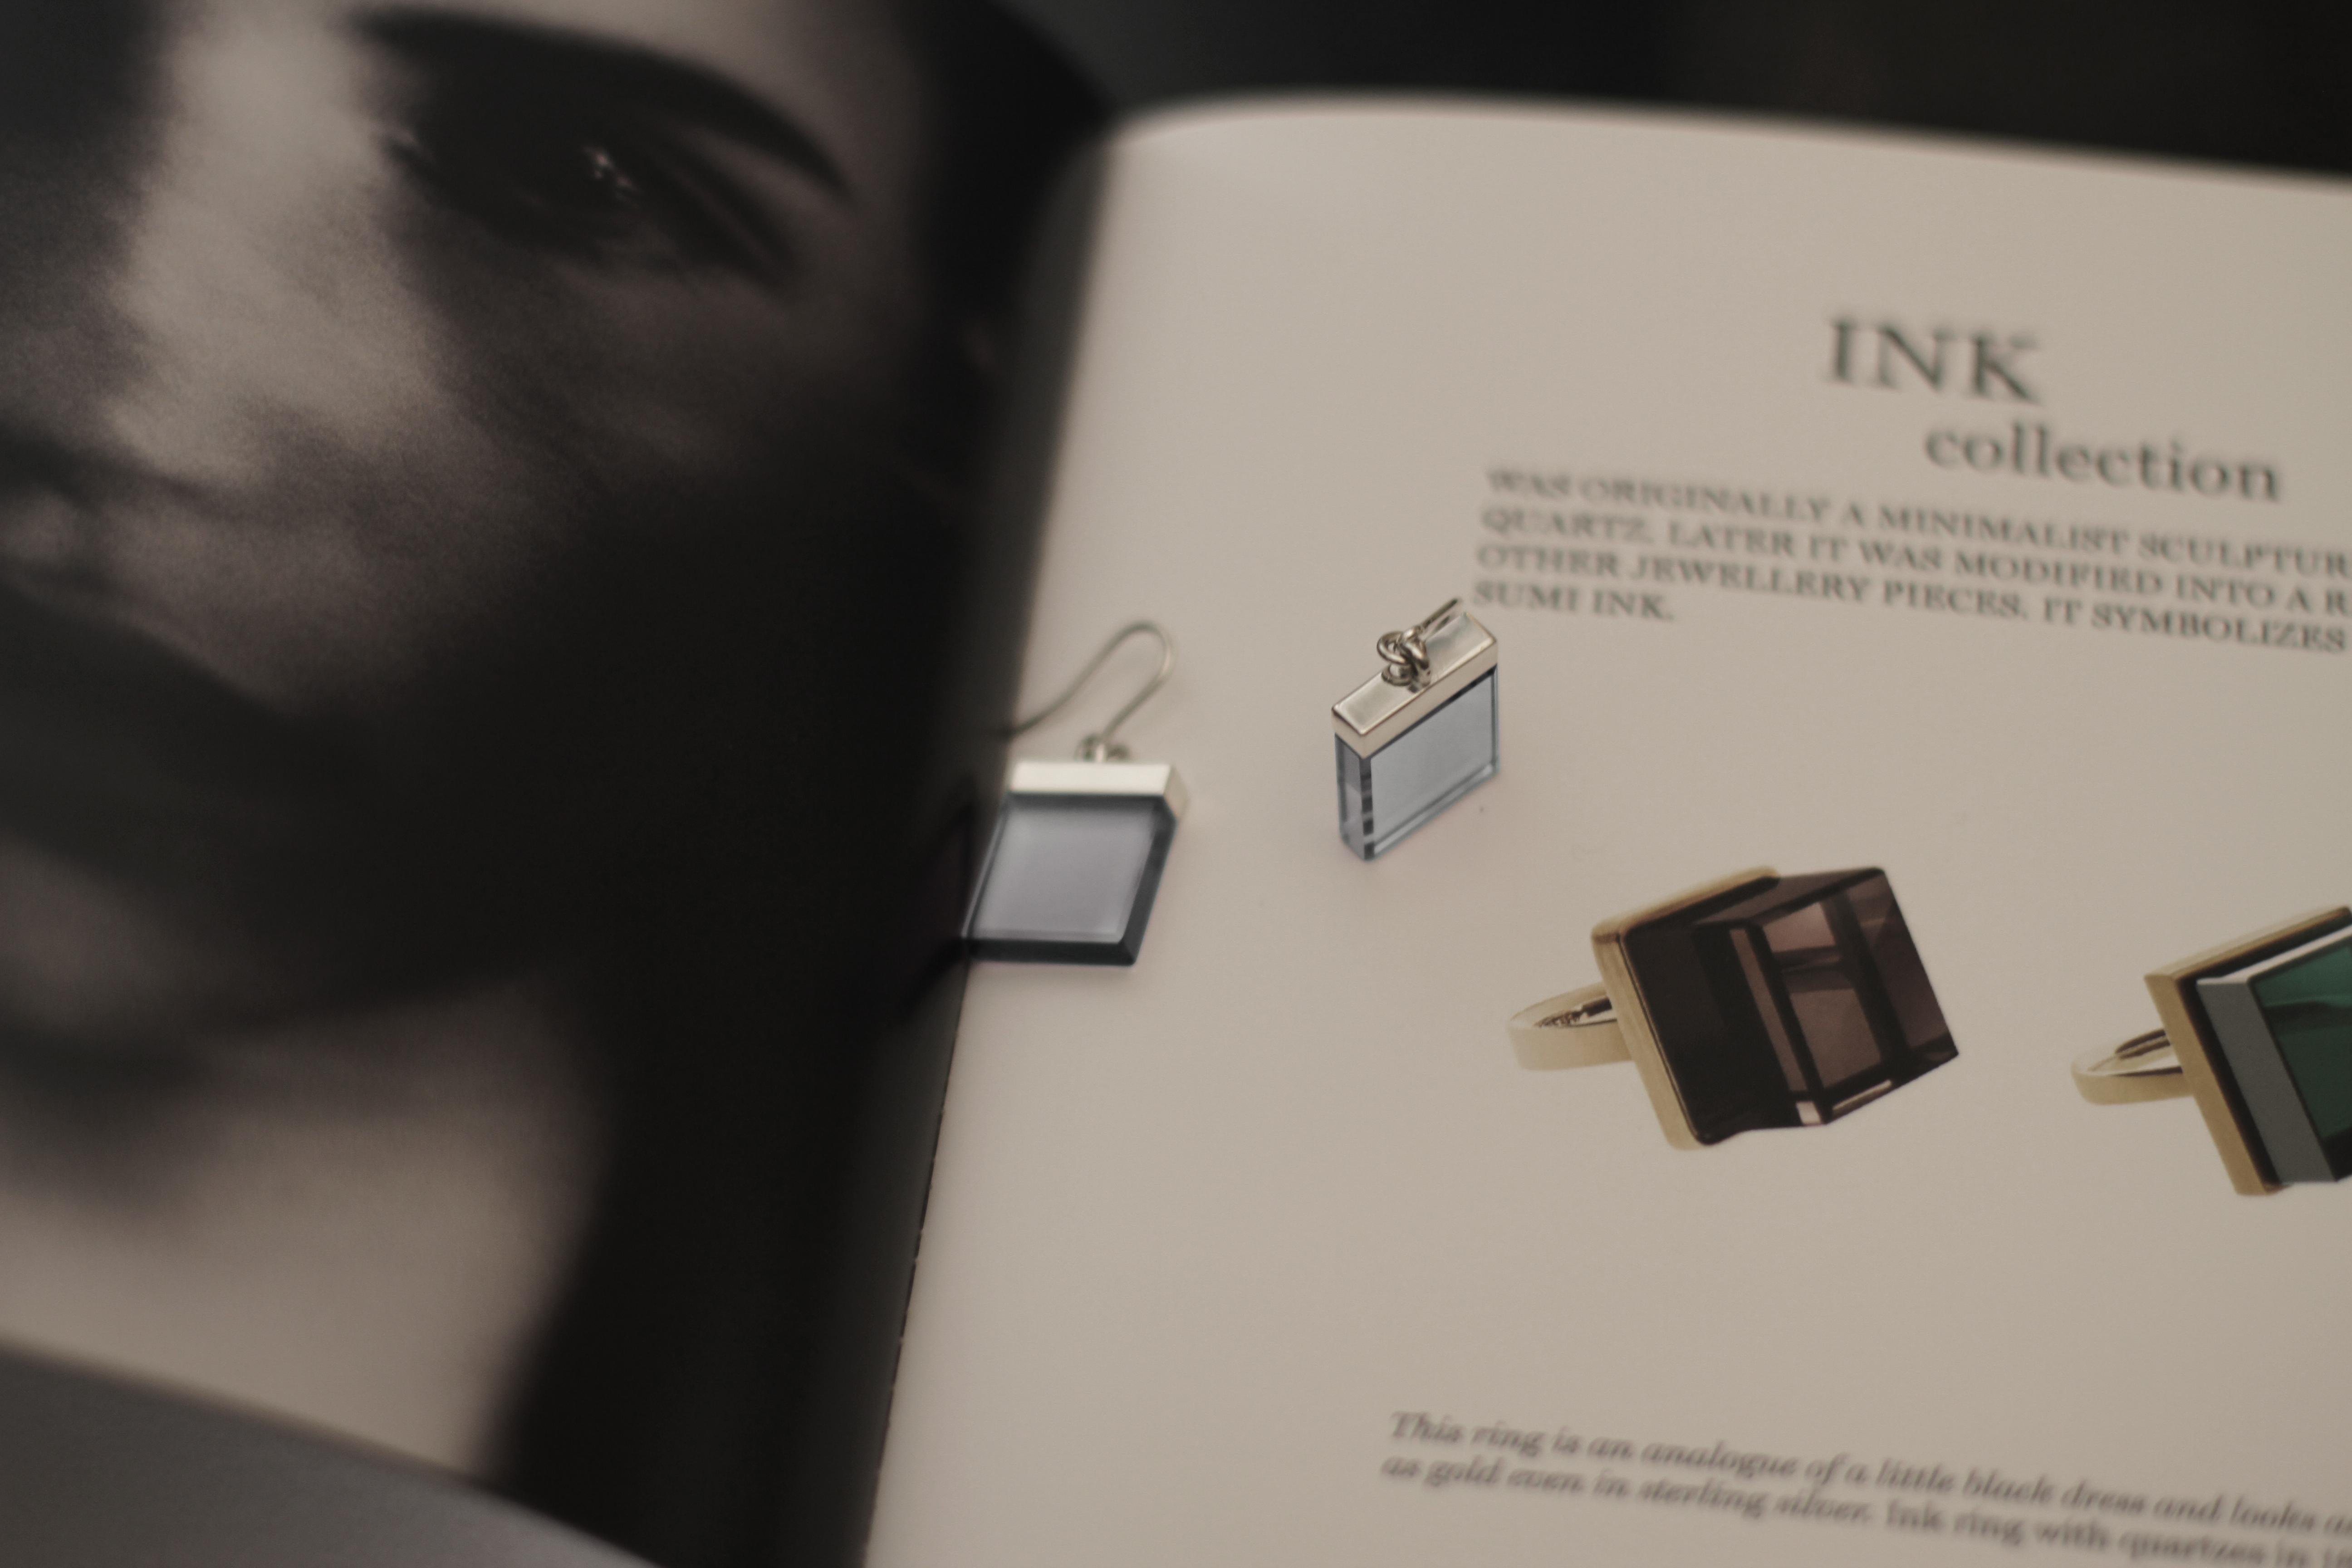 This jewelry collection has been featured in both Harper's Bazaar UA and Vogue UA. The collection was designed as sculptures by the oil painter Polya Medvedeva from Berlin.

The earrings are made of 18 karat white gold with tender blue grown